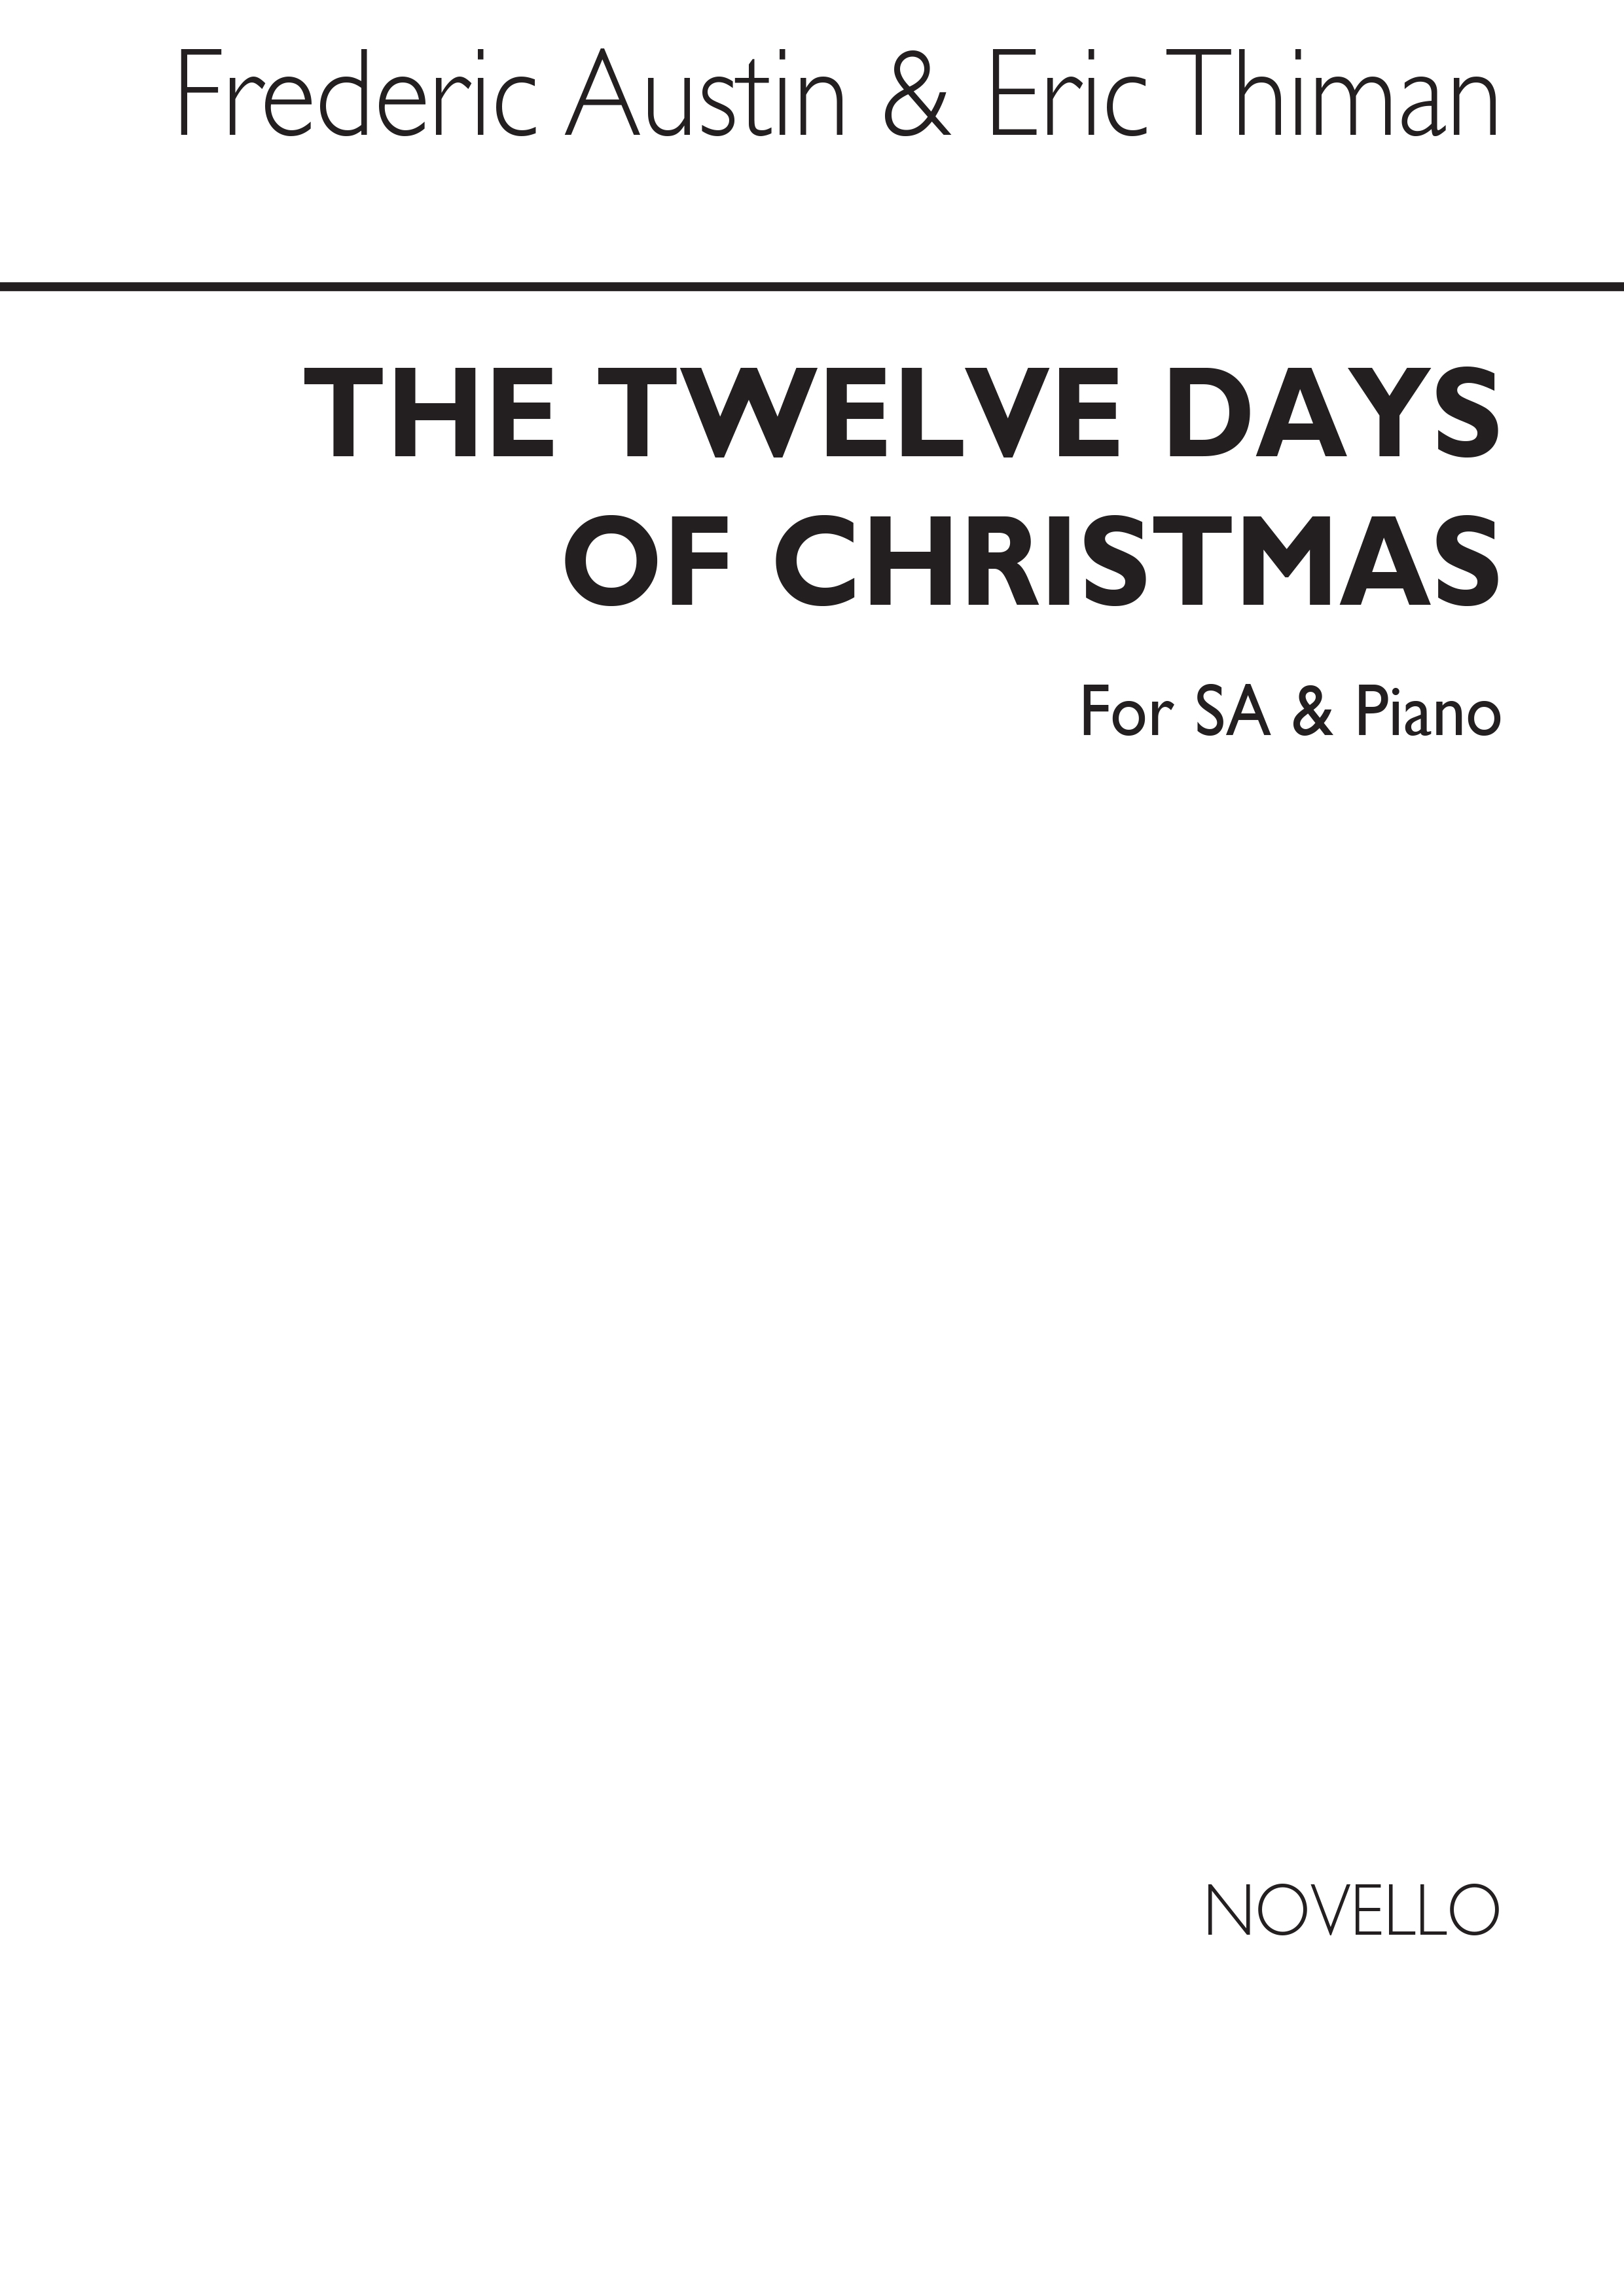 Twelve Days Of Christmas for SA with Piano: Upper Voices: Vocal Work